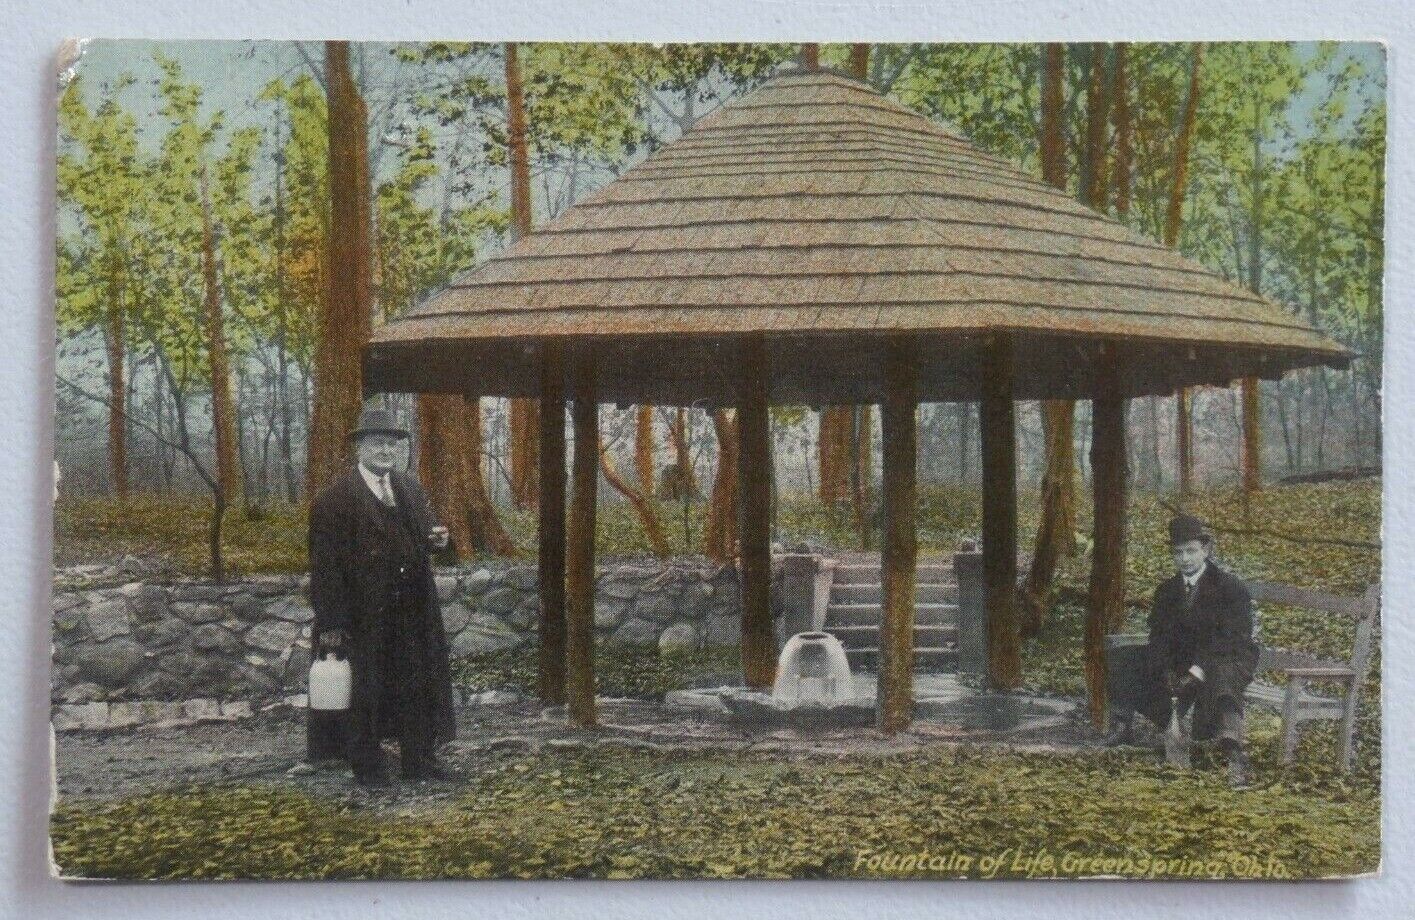 Fountain of Life, Greensprings, Ohio 1916 Divided Back Postcard 7792